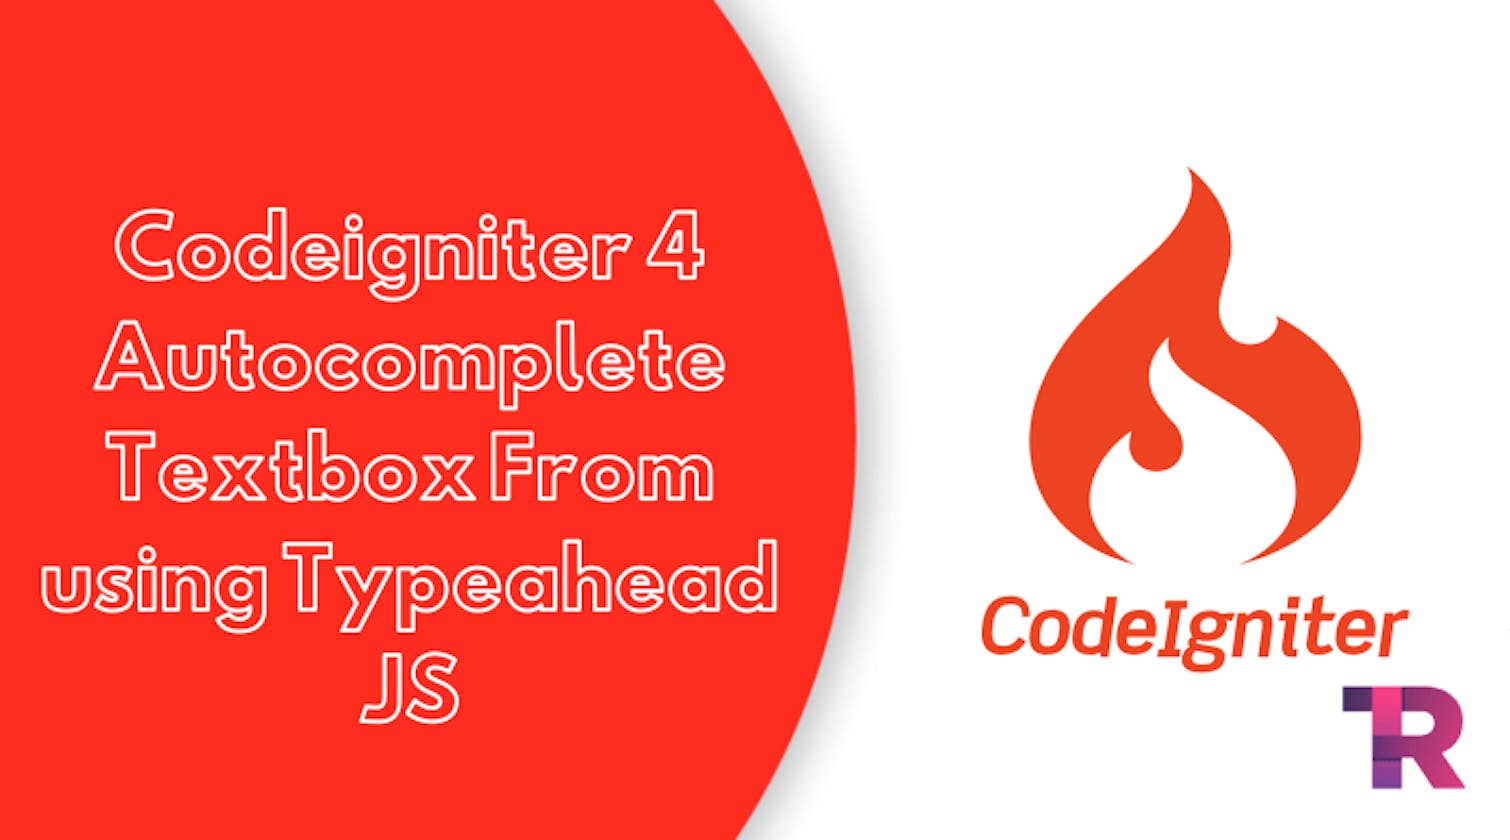 Codeigniter 4 Autocomplete Textbox From Database using Typeahead JS